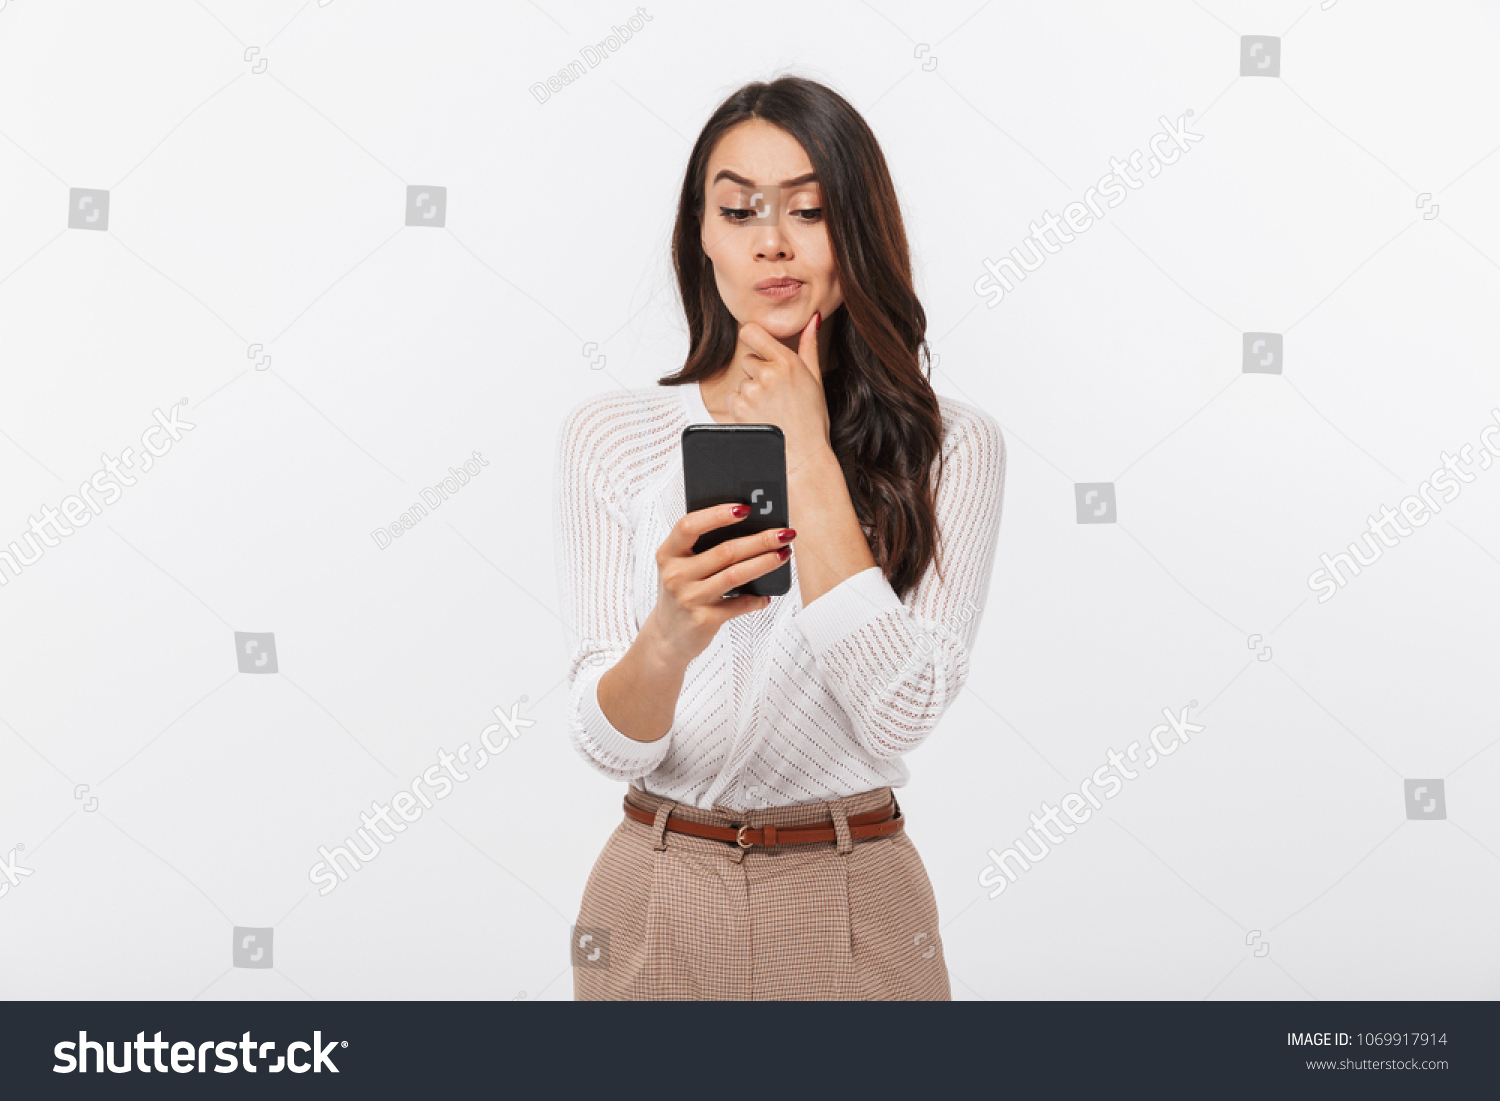 Portrait of a pensive asian businesswoman using mobile phone isolated over white background #1069917914